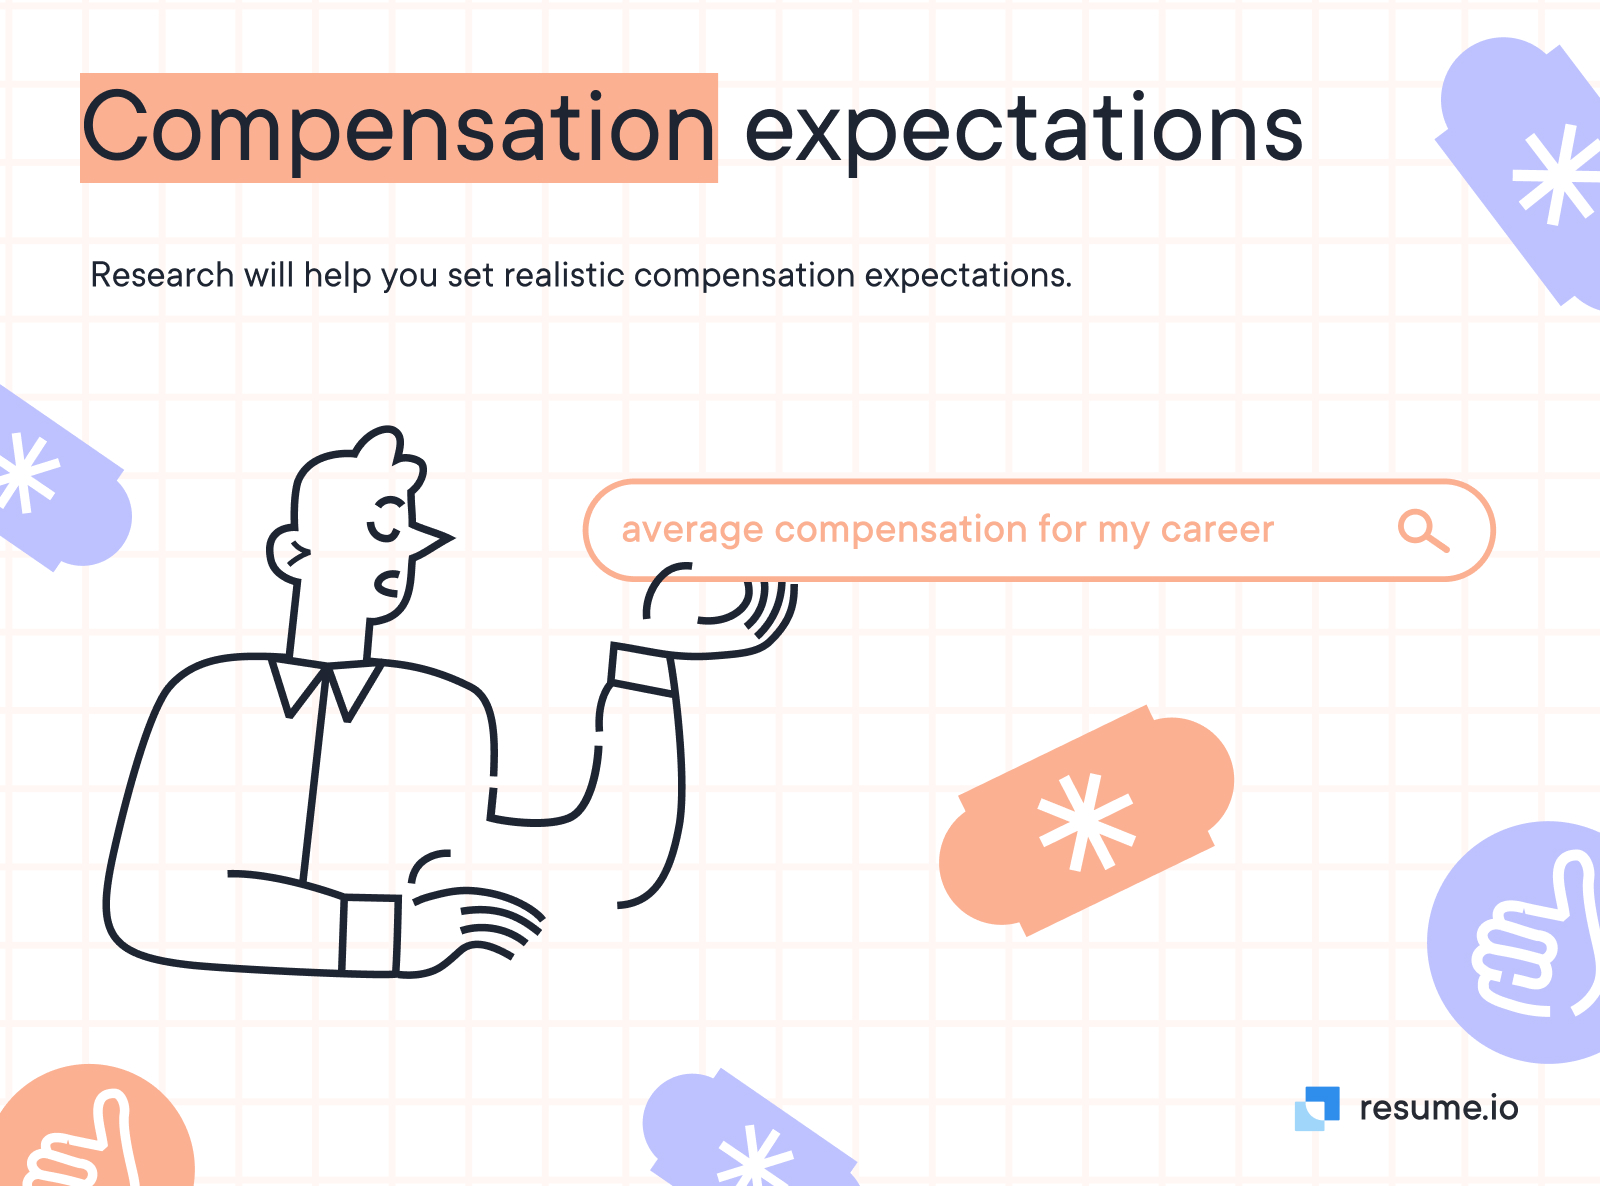 Compensation expectations